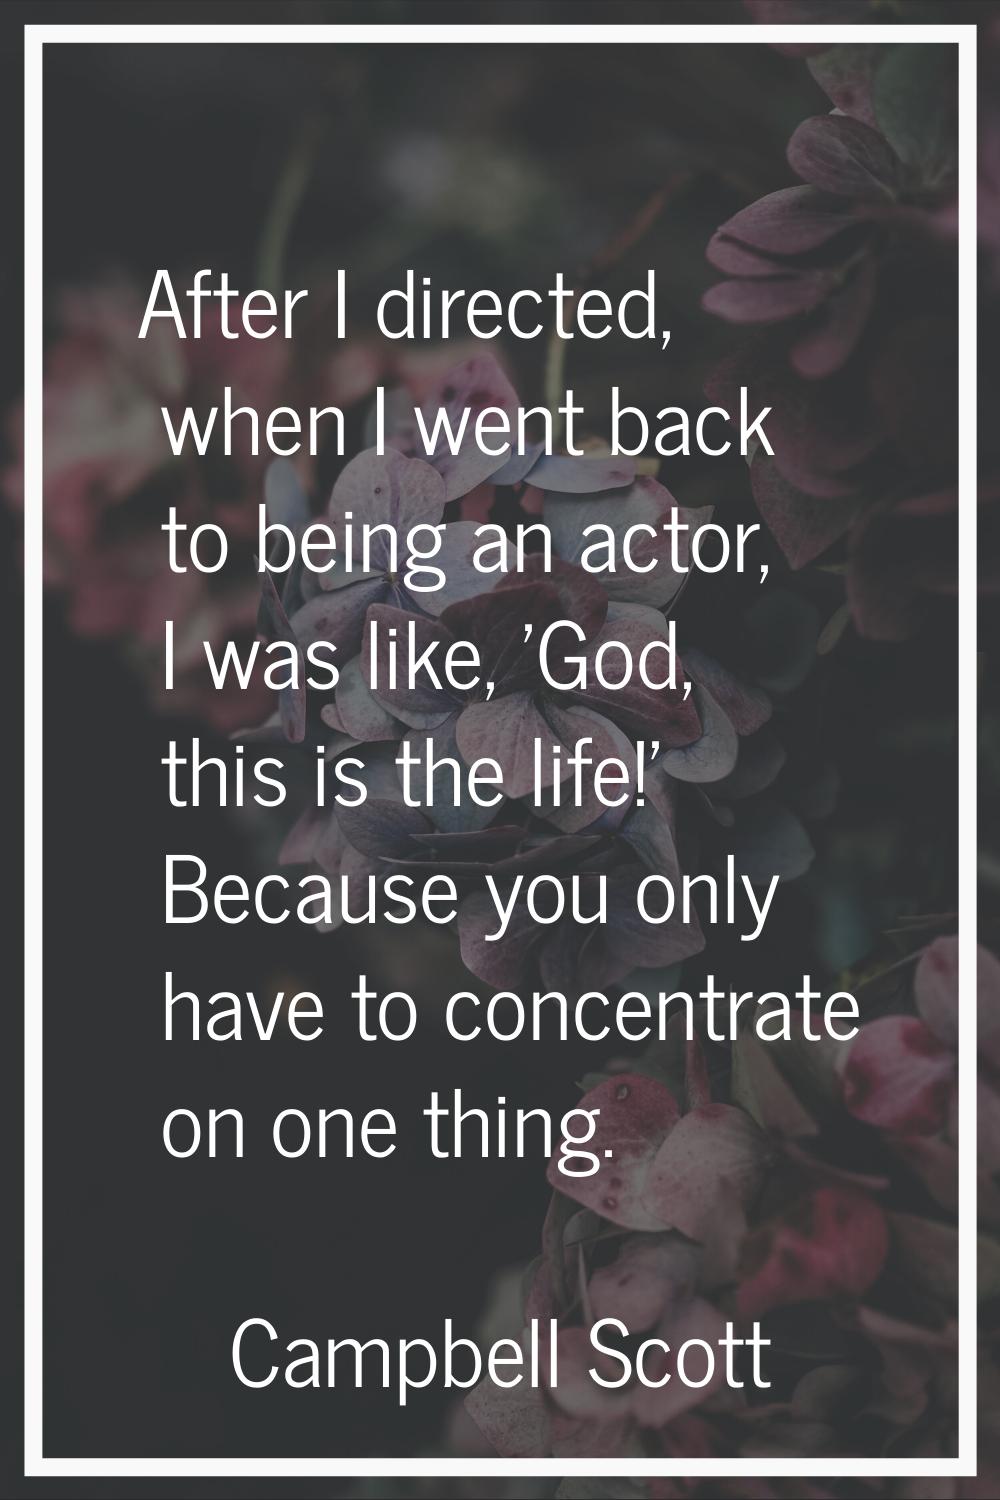 After I directed, when I went back to being an actor, I was like, 'God, this is the life!' Because 